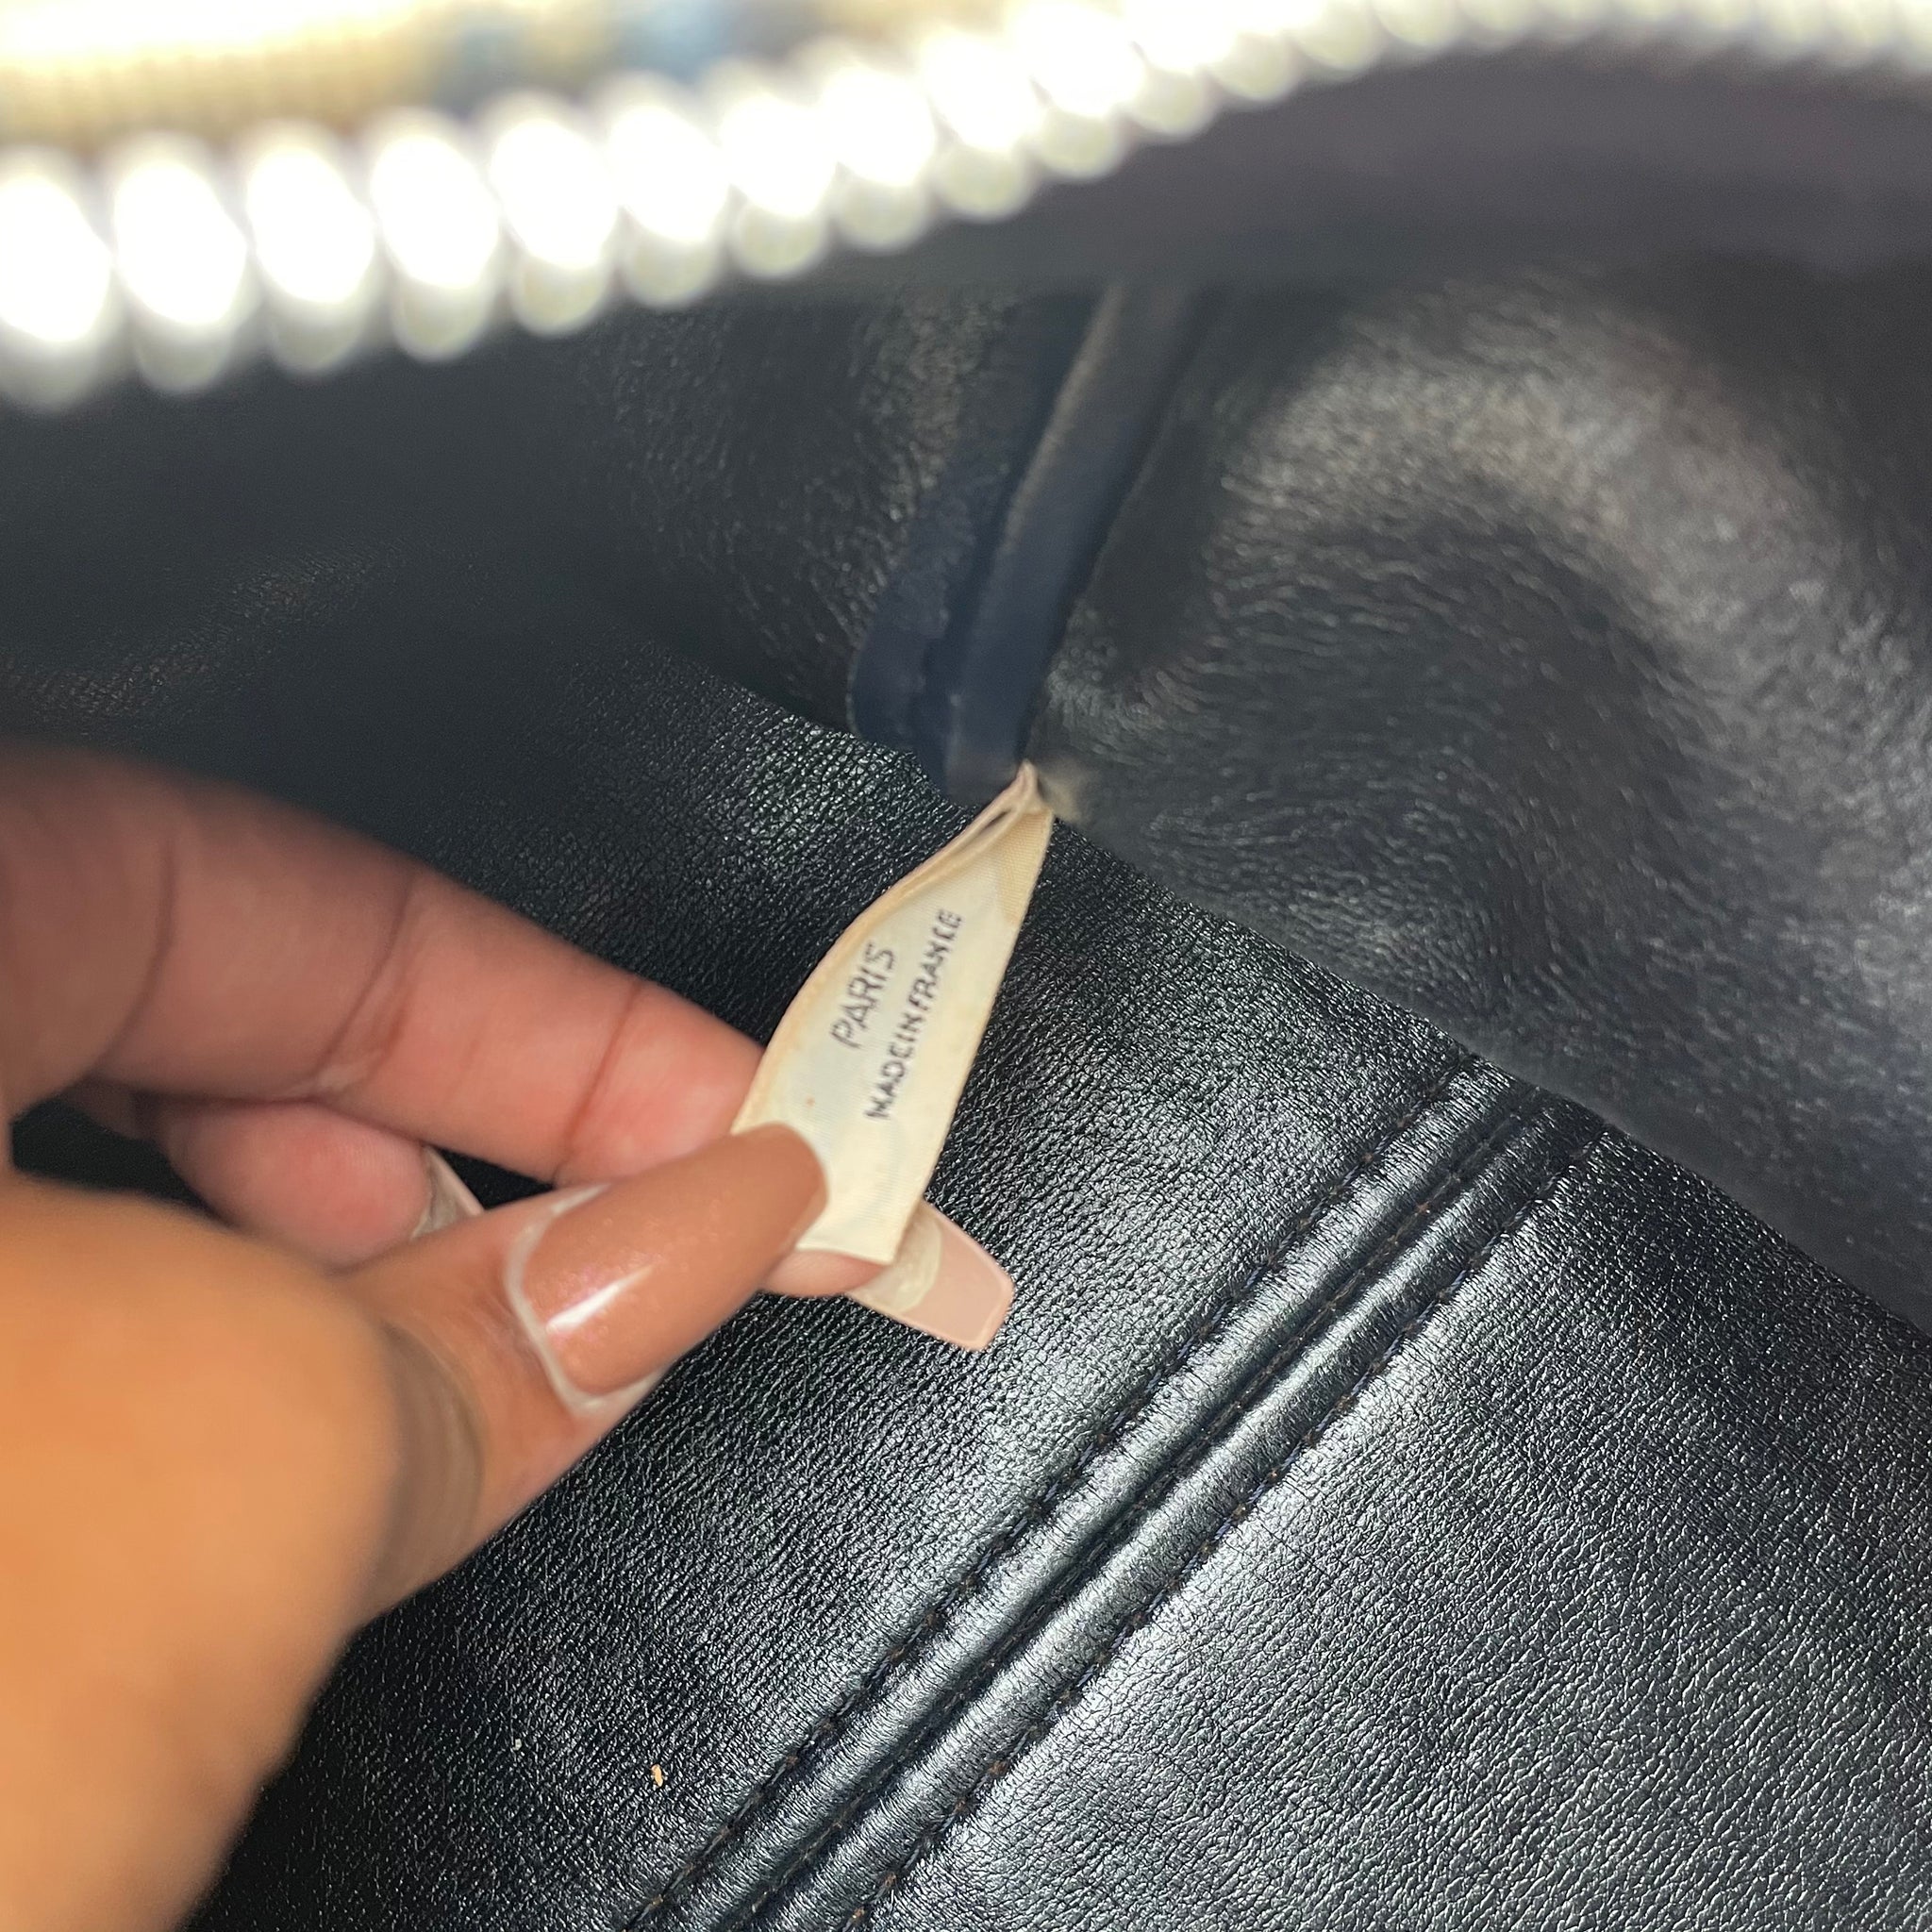 Christian Dior Navy and cream Trotter Boston bag – Apalboutique